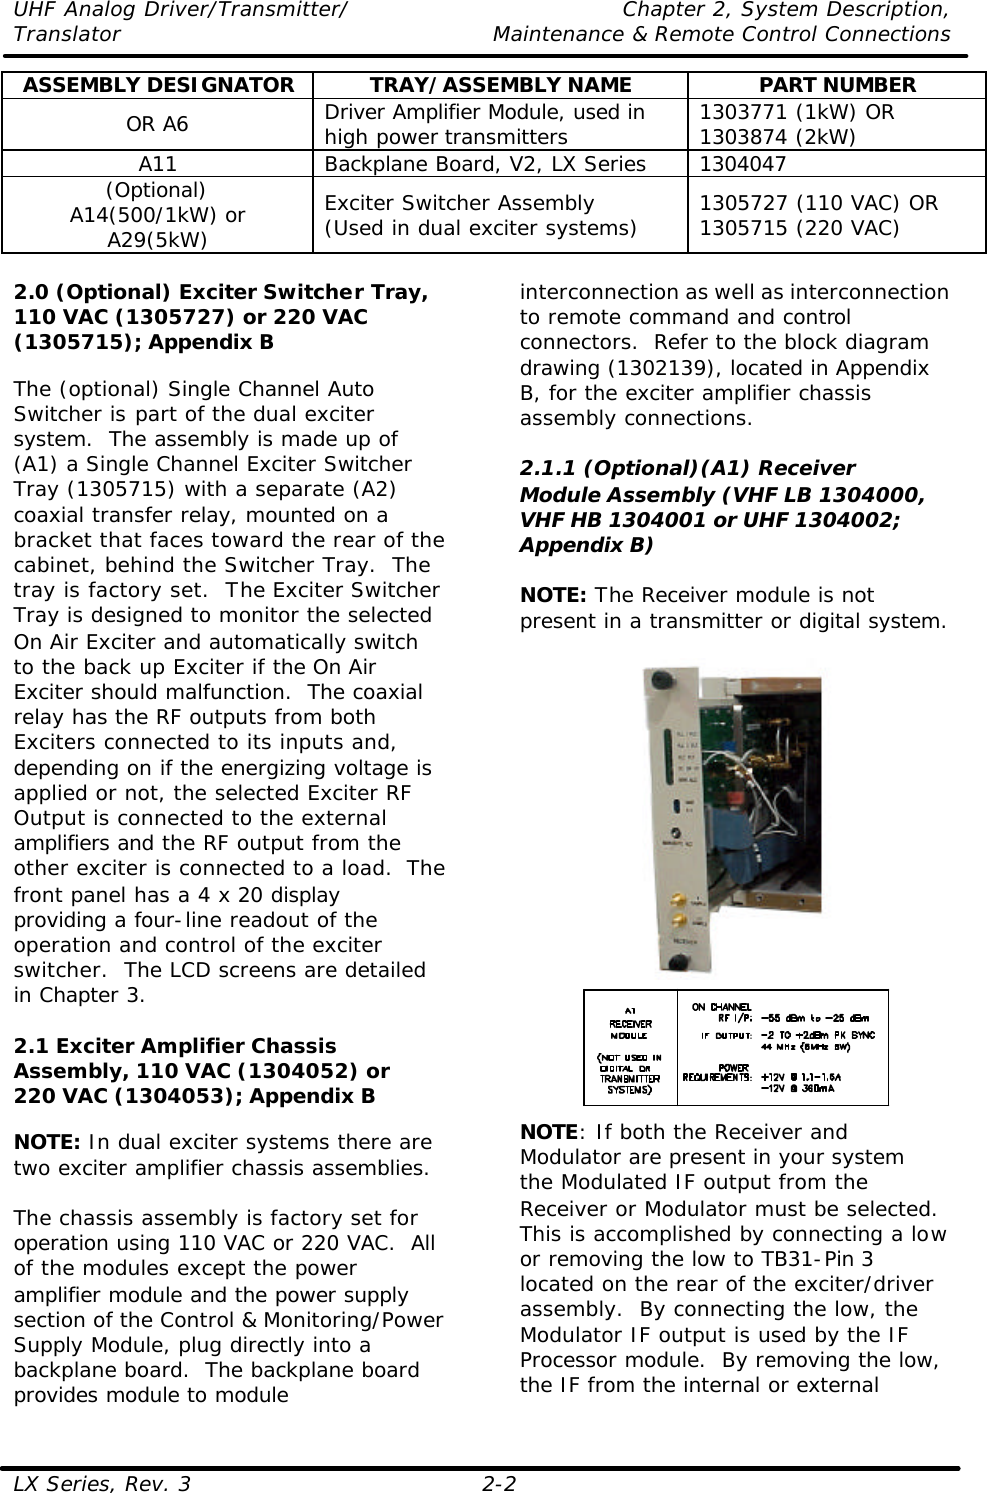 UHF Analog Driver/Transmitter/ Chapter 2, System Description, Translator Maintenance &amp; Remote Control Connections LX Series, Rev. 3 2-2 ASSEMBLY DESIGNATOR TRAY/ASSEMBLY NAME PART NUMBER OR A6 Driver Amplifier Module, used in high power transmitters 1303771 (1kW) OR 1303874 (2kW) A11 Backplane Board, V2, LX Series 1304047 (Optional) A14(500/1kW) or A29(5kW) Exciter Switcher Assembly (Used in dual exciter systems) 1305727 (110 VAC) OR 1305715 (220 VAC)  2.0 (Optional) Exciter Switcher Tray, 110 VAC (1305727) or 220 VAC (1305715); Appendix B  The (optional) Single Channel Auto Switcher is part of the dual exciter system.  The assembly is made up of (A1) a Single Channel Exciter Switcher Tray (1305715) with a separate (A2) coaxial transfer relay, mounted on a bracket that faces toward the rear of the cabinet, behind the Switcher Tray.  The tray is factory set.  The Exciter Switcher Tray is designed to monitor the selected On Air Exciter and automatically switch to the back up Exciter if the On Air Exciter should malfunction.  The coaxial relay has the RF outputs from both Exciters connected to its inputs and, depending on if the energizing voltage is applied or not, the selected Exciter RF Output is connected to the external amplifiers and the RF output from the other exciter is connected to a load.  The front panel has a 4 x 20 display providing a four-line readout of the operation and control of the exciter switcher.  The LCD screens are detailed in Chapter 3.  2.1 Exciter Amplifier Chassis Assembly, 110 VAC (1304052) or 220 VAC (1304053); Appendix B  NOTE: In dual exciter systems there are two exciter amplifier chassis assemblies.  The chassis assembly is factory set for operation using 110 VAC or 220 VAC.  All of the modules except the power amplifier module and the power supply section of the Control &amp; Monitoring/Power Supply Module, plug directly into a backplane board.  The backplane board provides module to module interconnection as well as interconnection to remote command and control connectors.  Refer to the block diagram drawing (1302139), located in Appendix B, for the exciter amplifier chassis assembly connections.  2.1.1 (Optional)(A1) Receiver Module Assembly (VHF LB 1304000, VHF HB 1304001 or UHF 1304002; Appendix B)  NOTE: The Receiver module is not present in a transmitter or digital system.    NOTE: If both the Receiver and Modulator are present in your system the Modulated IF output from the Receiver or Modulator must be selected.  This is accomplished by connecting a low or removing the low to TB31-Pin 3 located on the rear of the exciter/driver assembly.  By connecting the low, the Modulator IF output is used by the IF Processor module.  By removing the low, the IF from the internal or external 